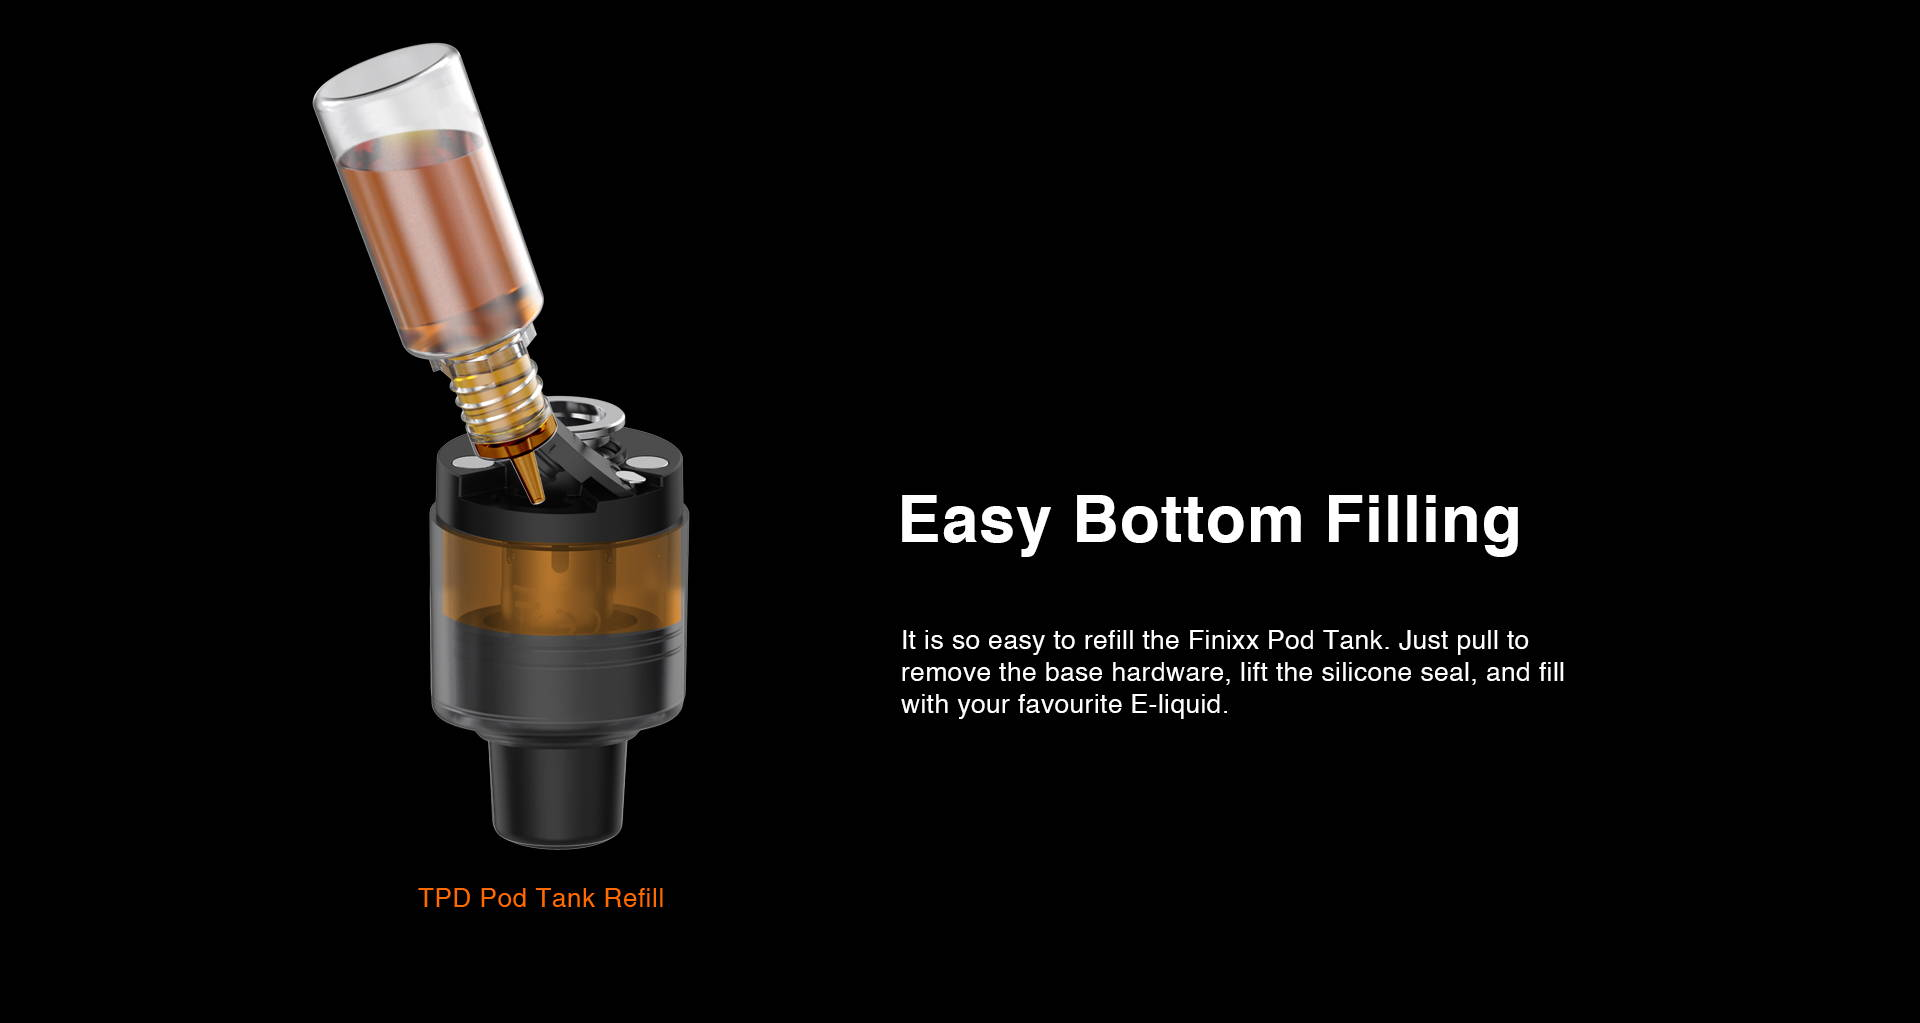 It is so easy to refill the Finixx Pod Tank. Just pull to remove the base hardware, lift the silicone seal, and fill your loved E-liquid.